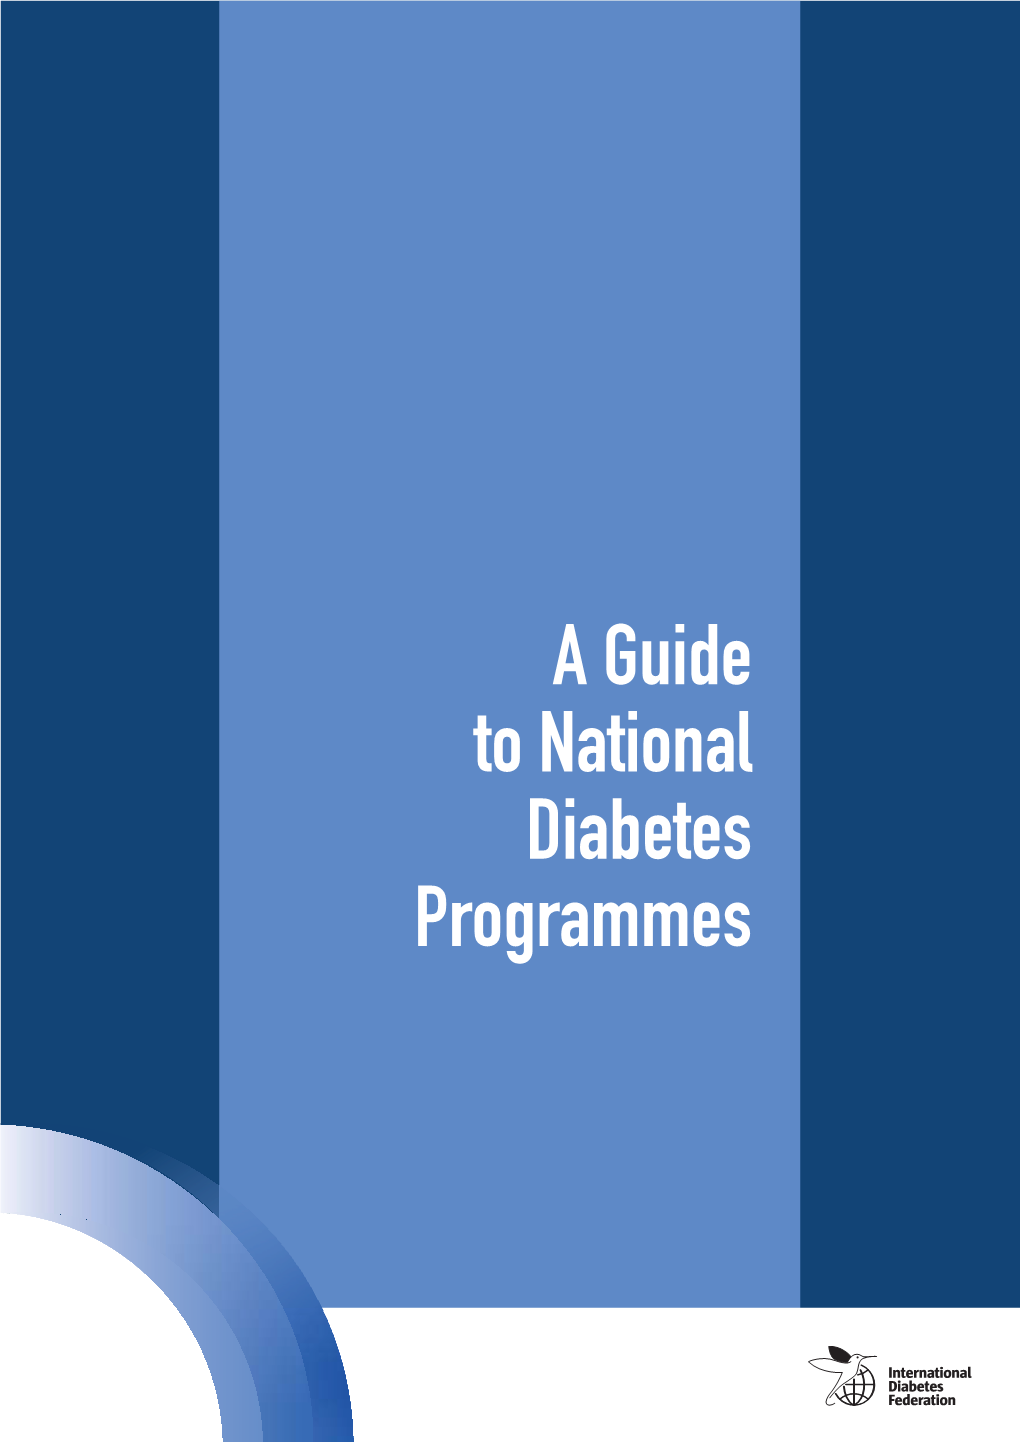 A Guide to National Diabetes Programmes the Mission of the International Diabetes Federation Is to Promote Diabetes Care, Prevention and a Cure Worldwide